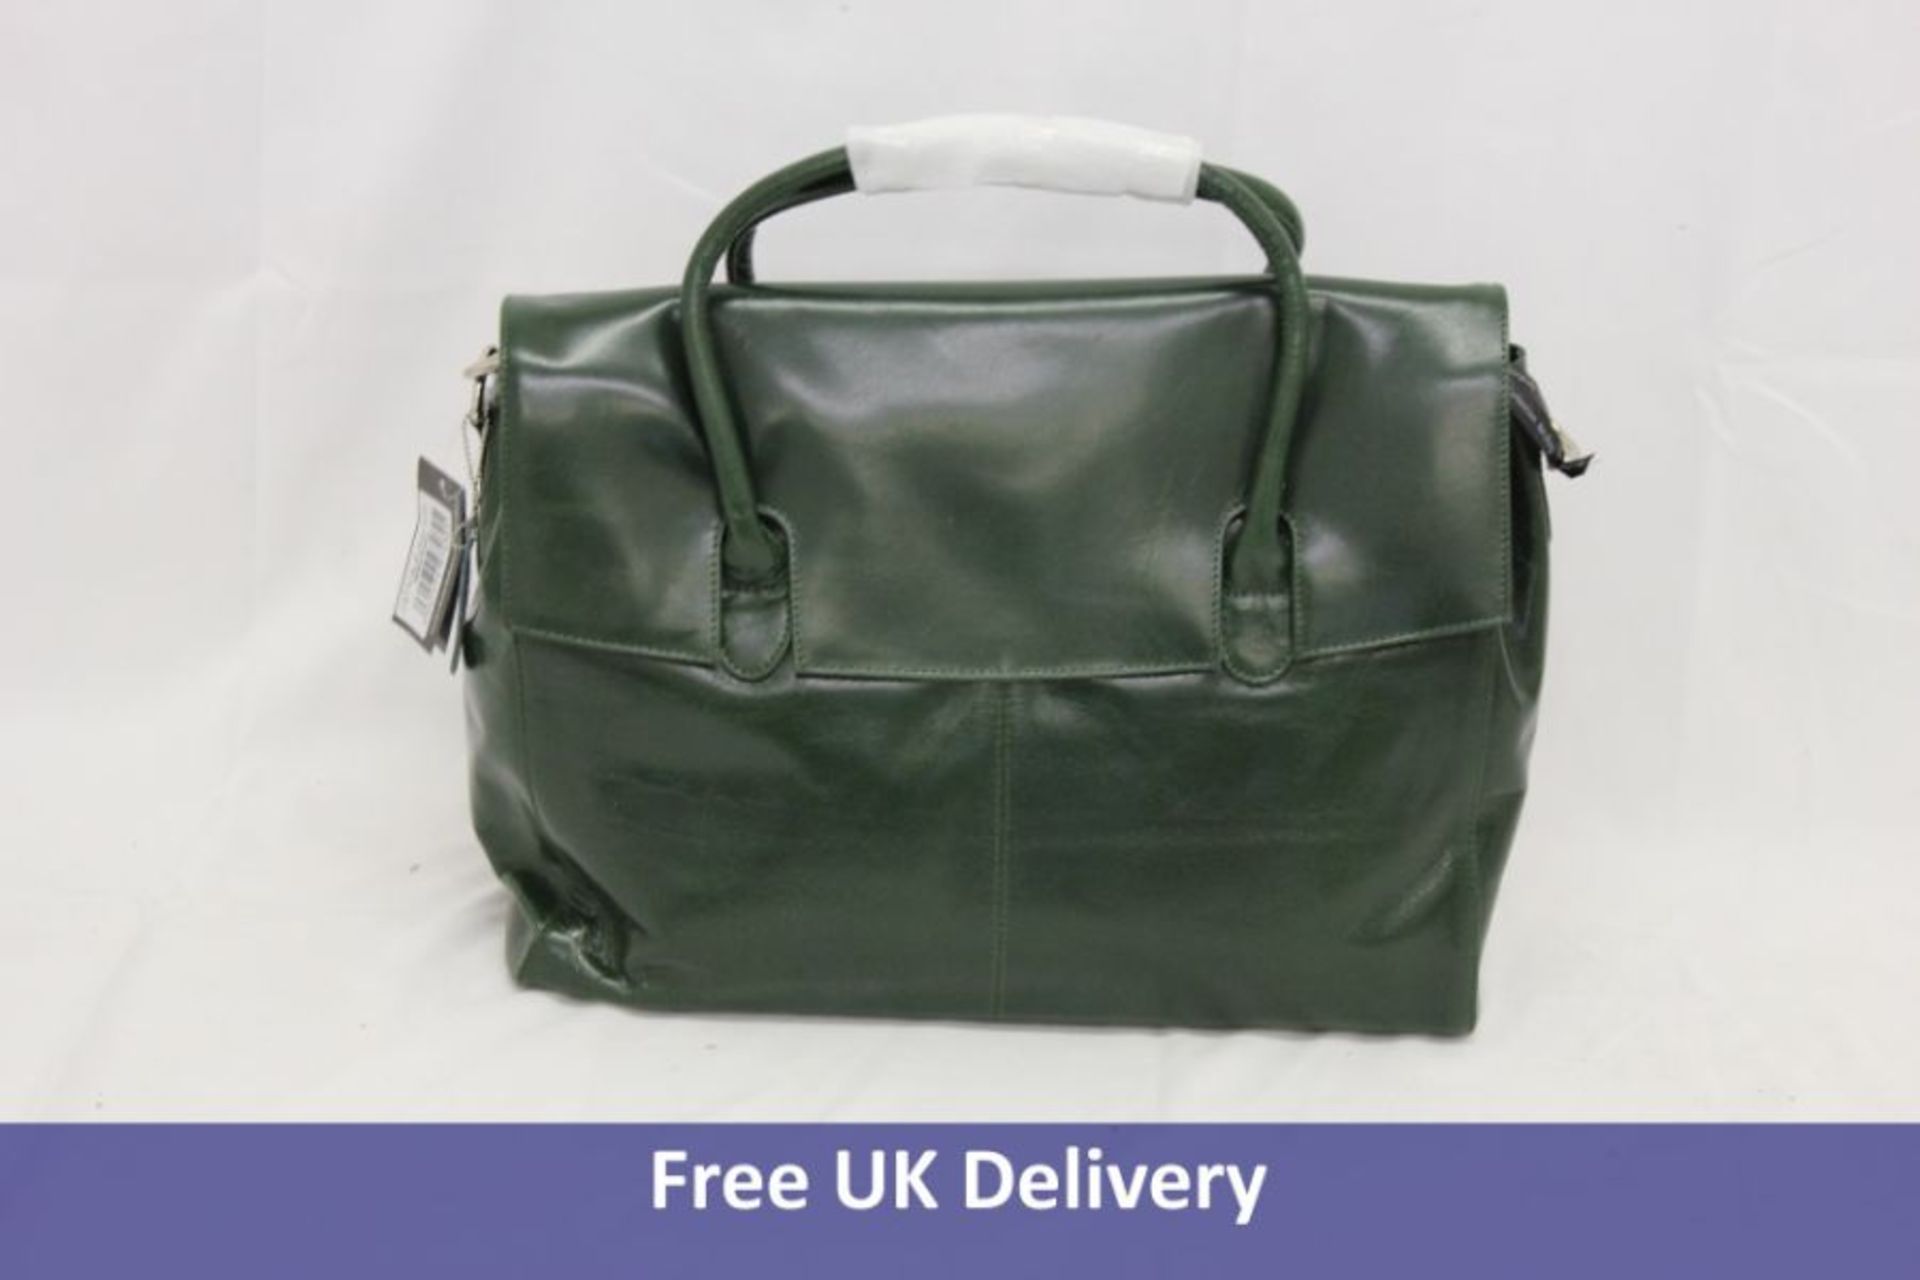 Two Catwalk Collection Handbags, Helena Green Leather Briefcase - Image 2 of 2